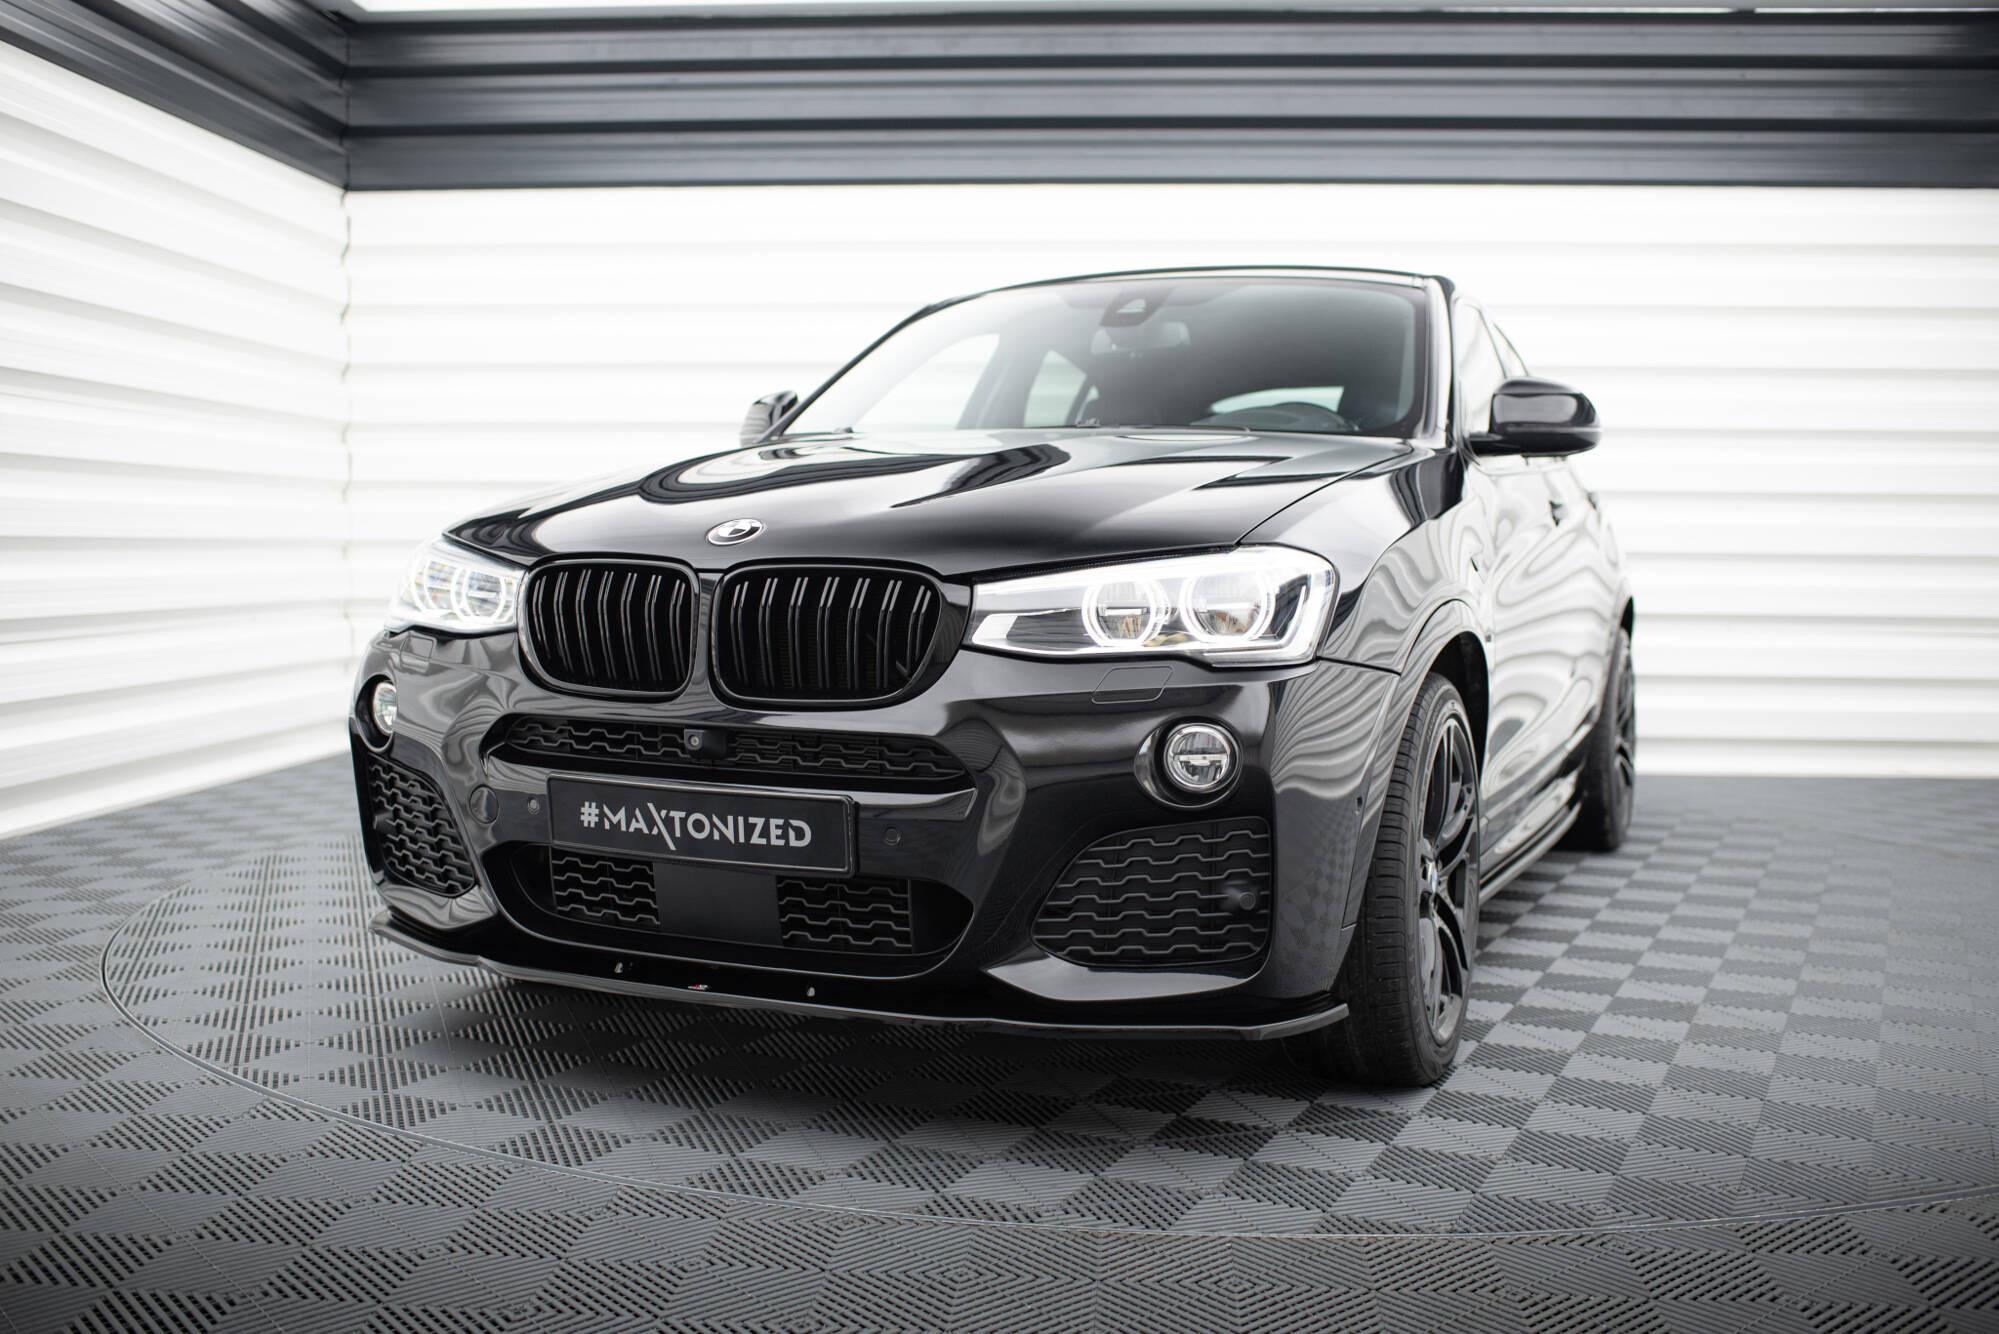 FRONT SPLITTER for Offer \\ BMW 2014-2018] X4 X4 | \\ Gloss Maxton | Our [ Design \\ M-PACK BMW F26 Black